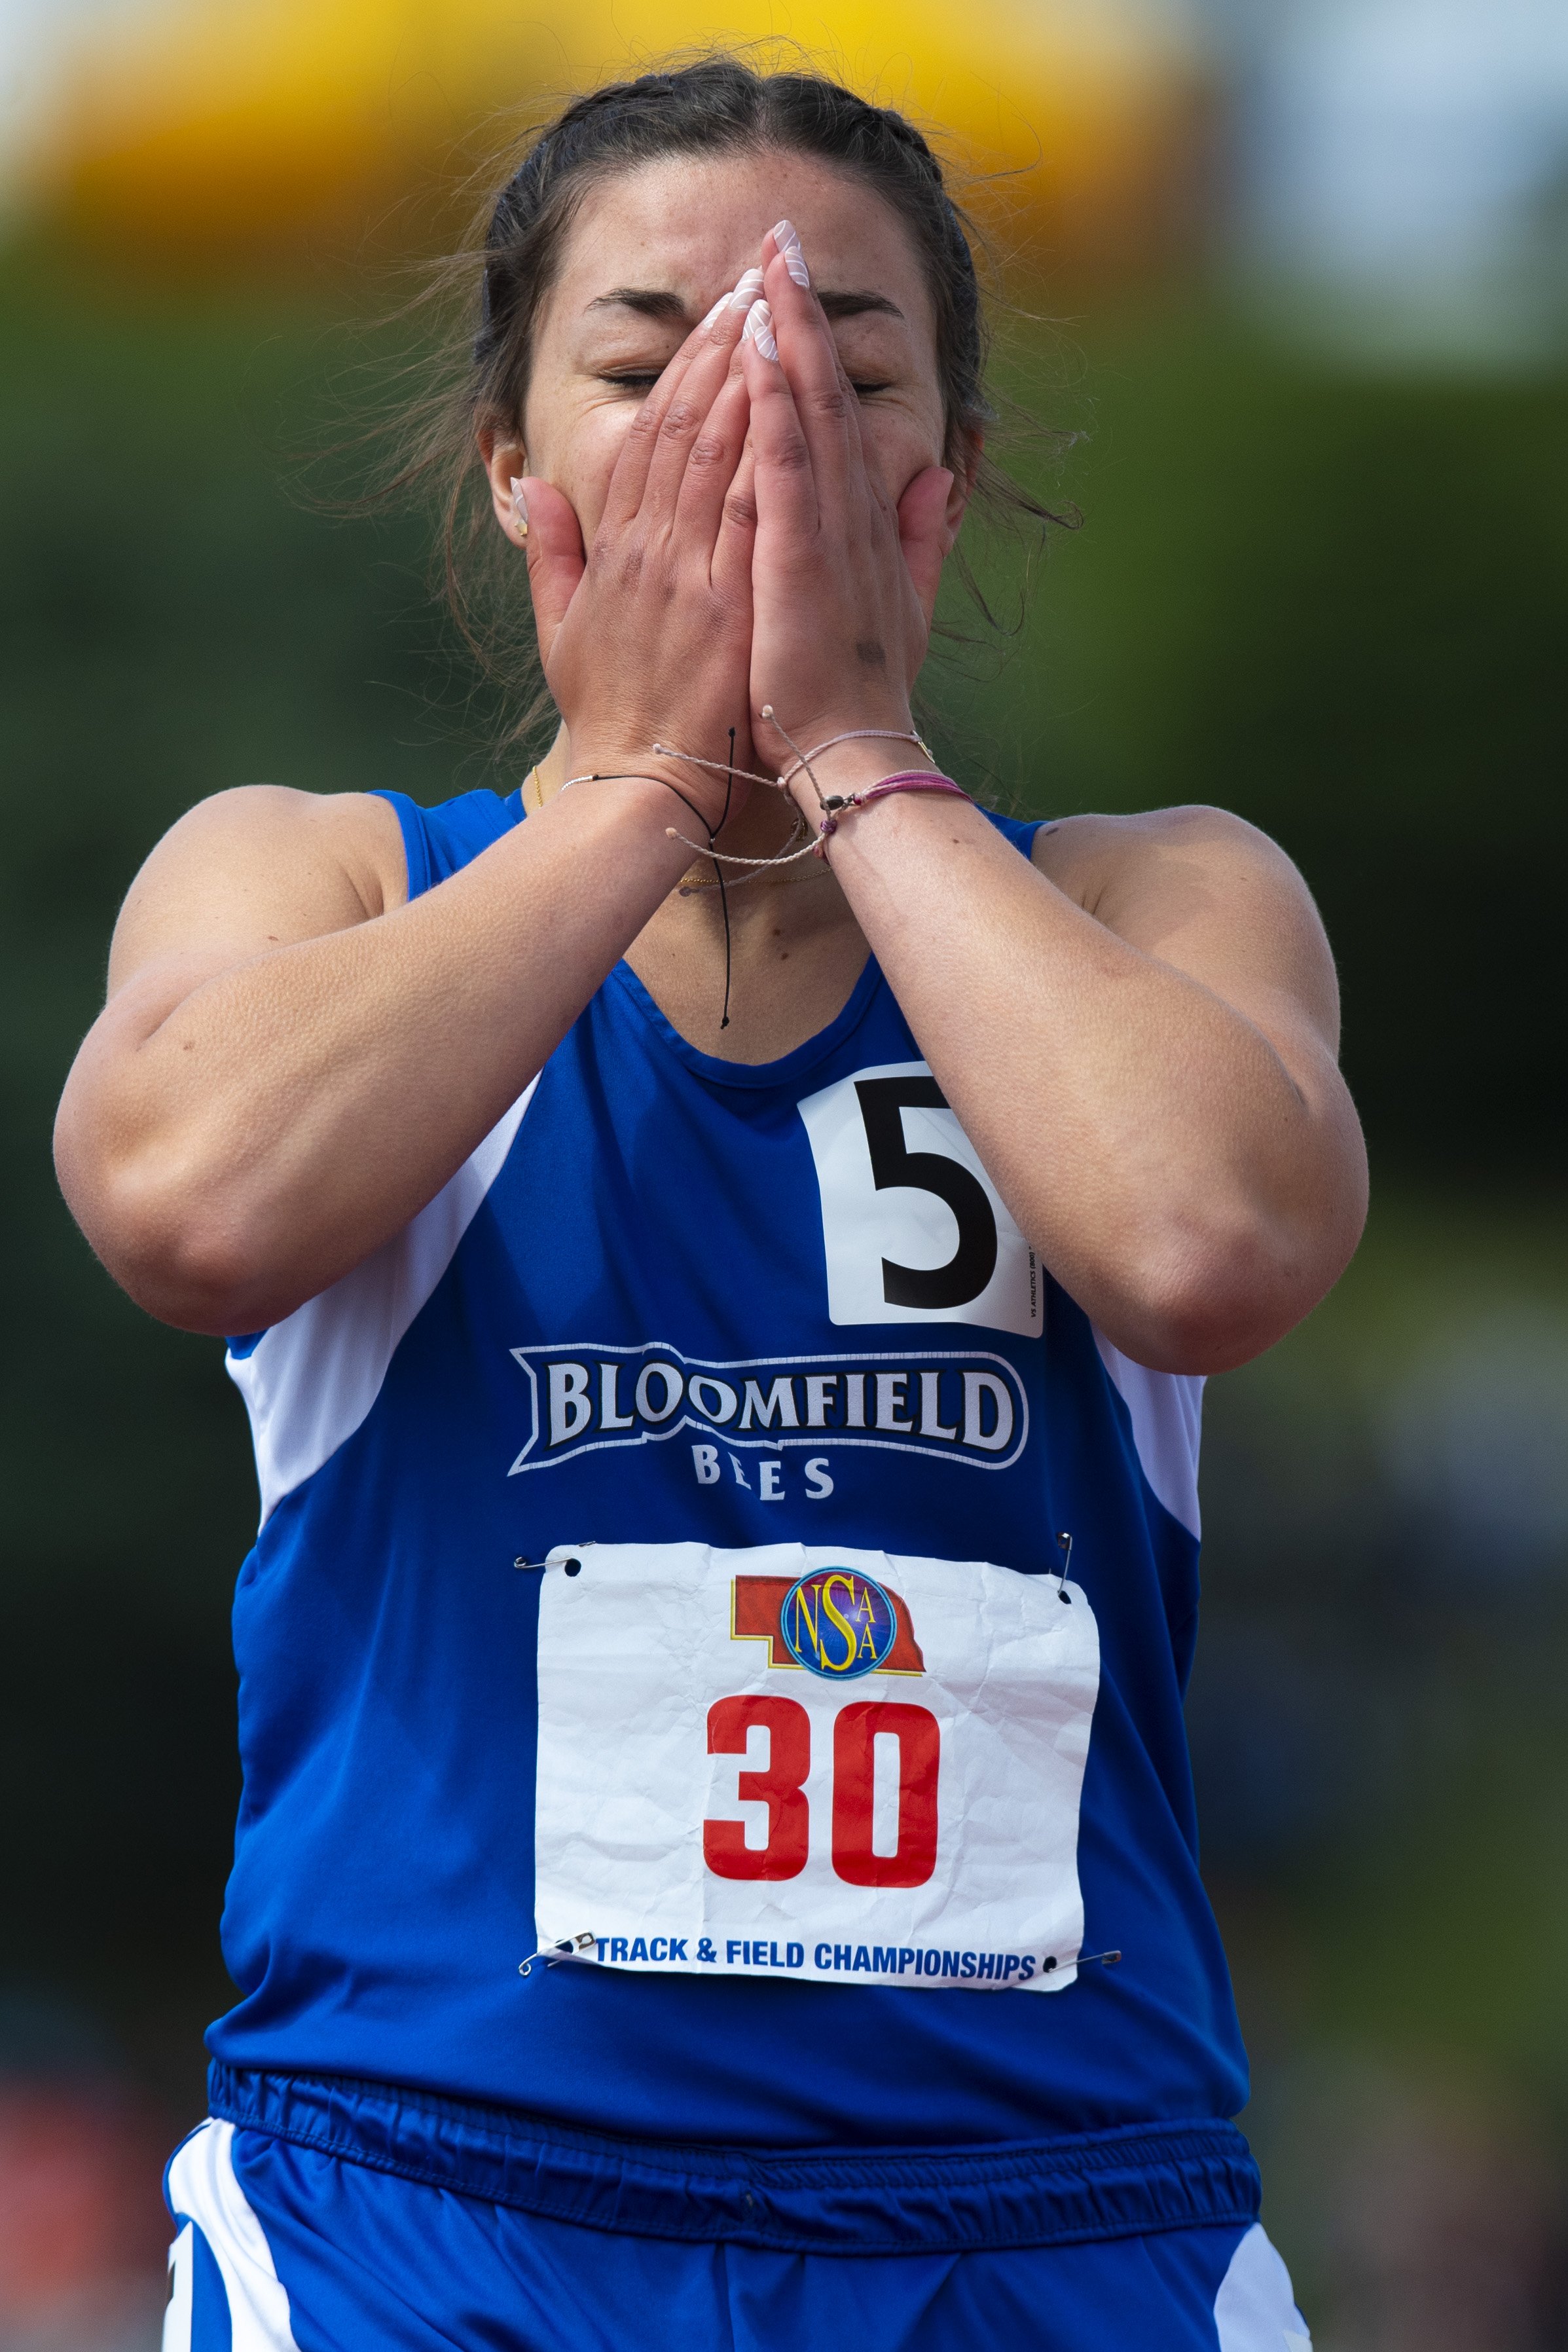  Bloomfield's Alexanddra Eisenhauer reacts after finishing ahead of North Platte's Hayley Miles (not pictured) in the Class D girls 100 meter dash during the state track championships at Burke Stadium on May 21, 2022, in Omaha, Nebraska. 